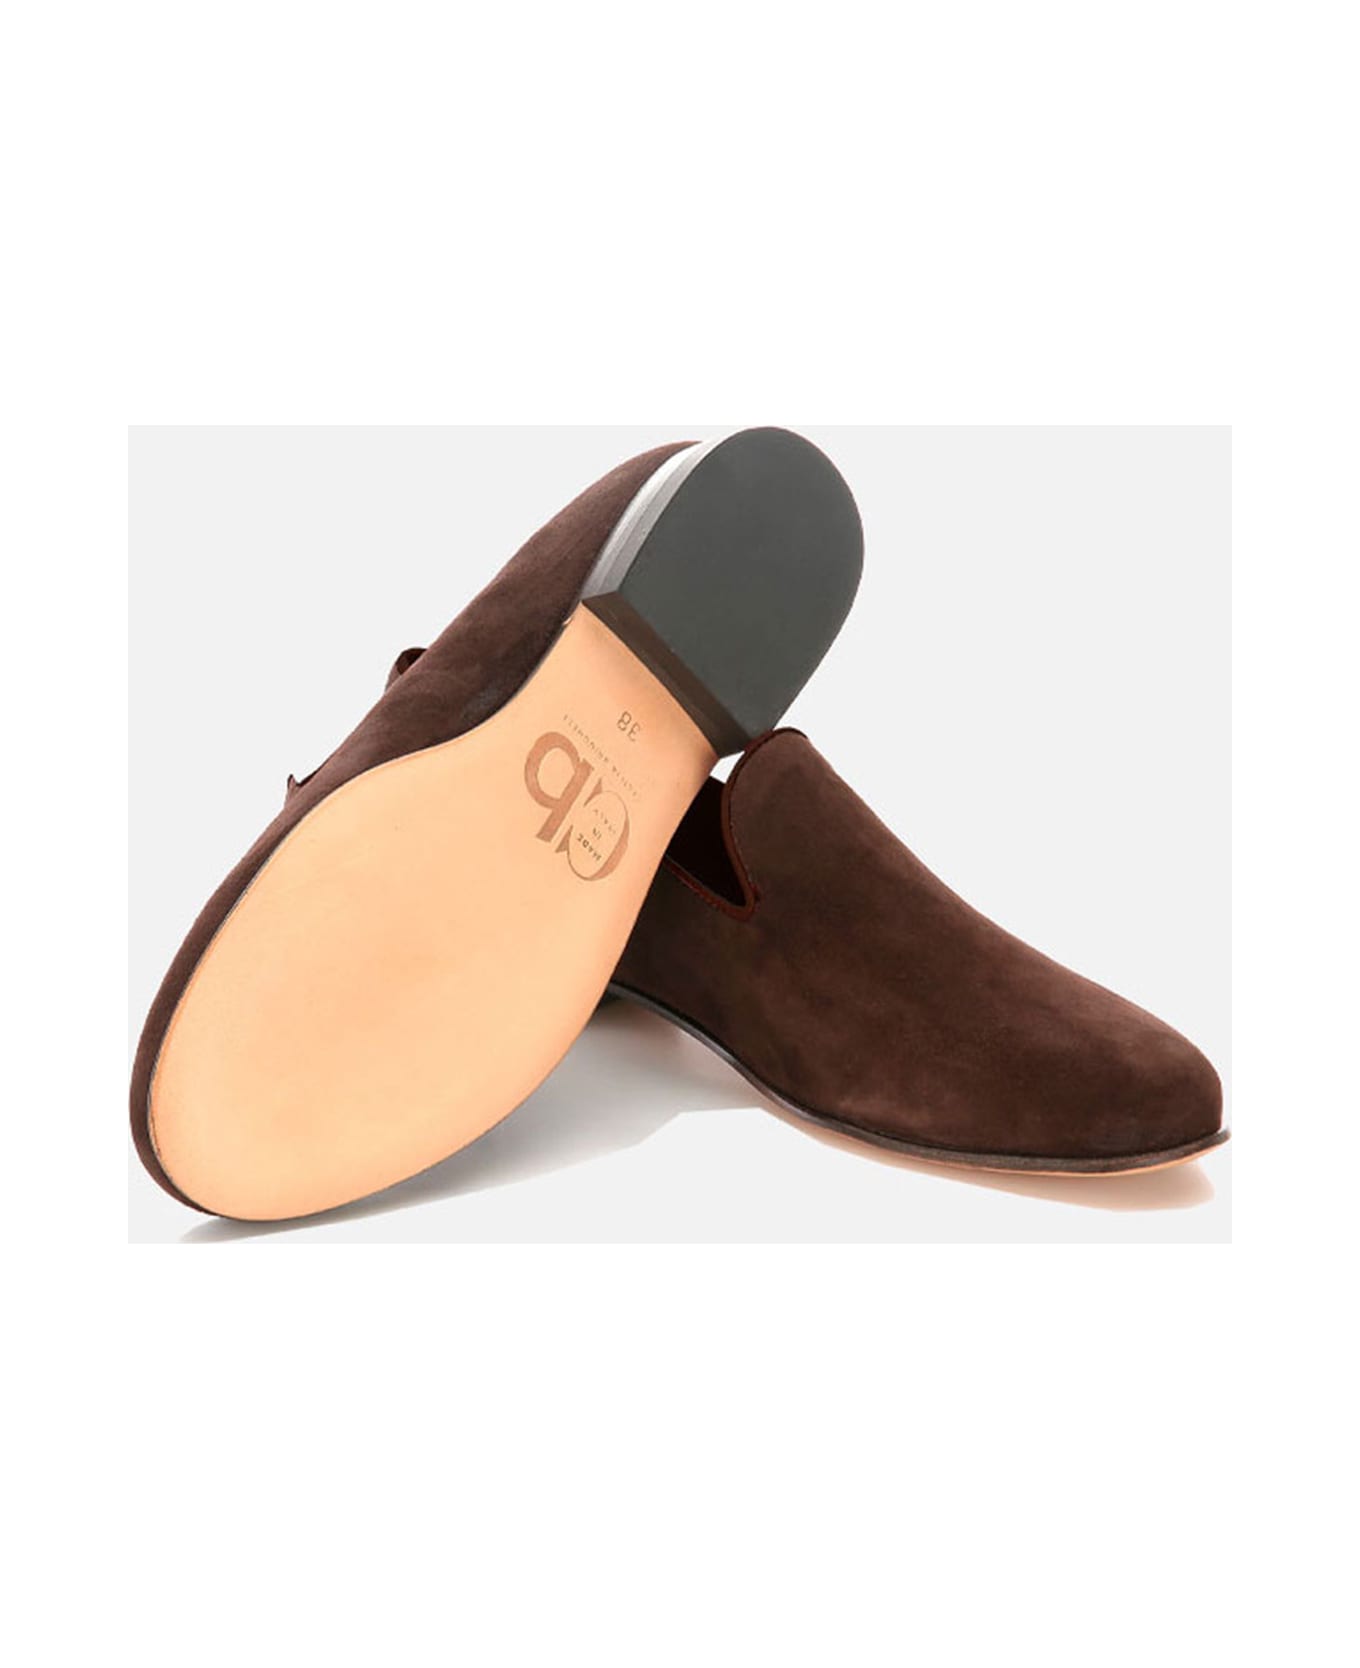 CB Made in Italy Suede Flats Positano - Brown